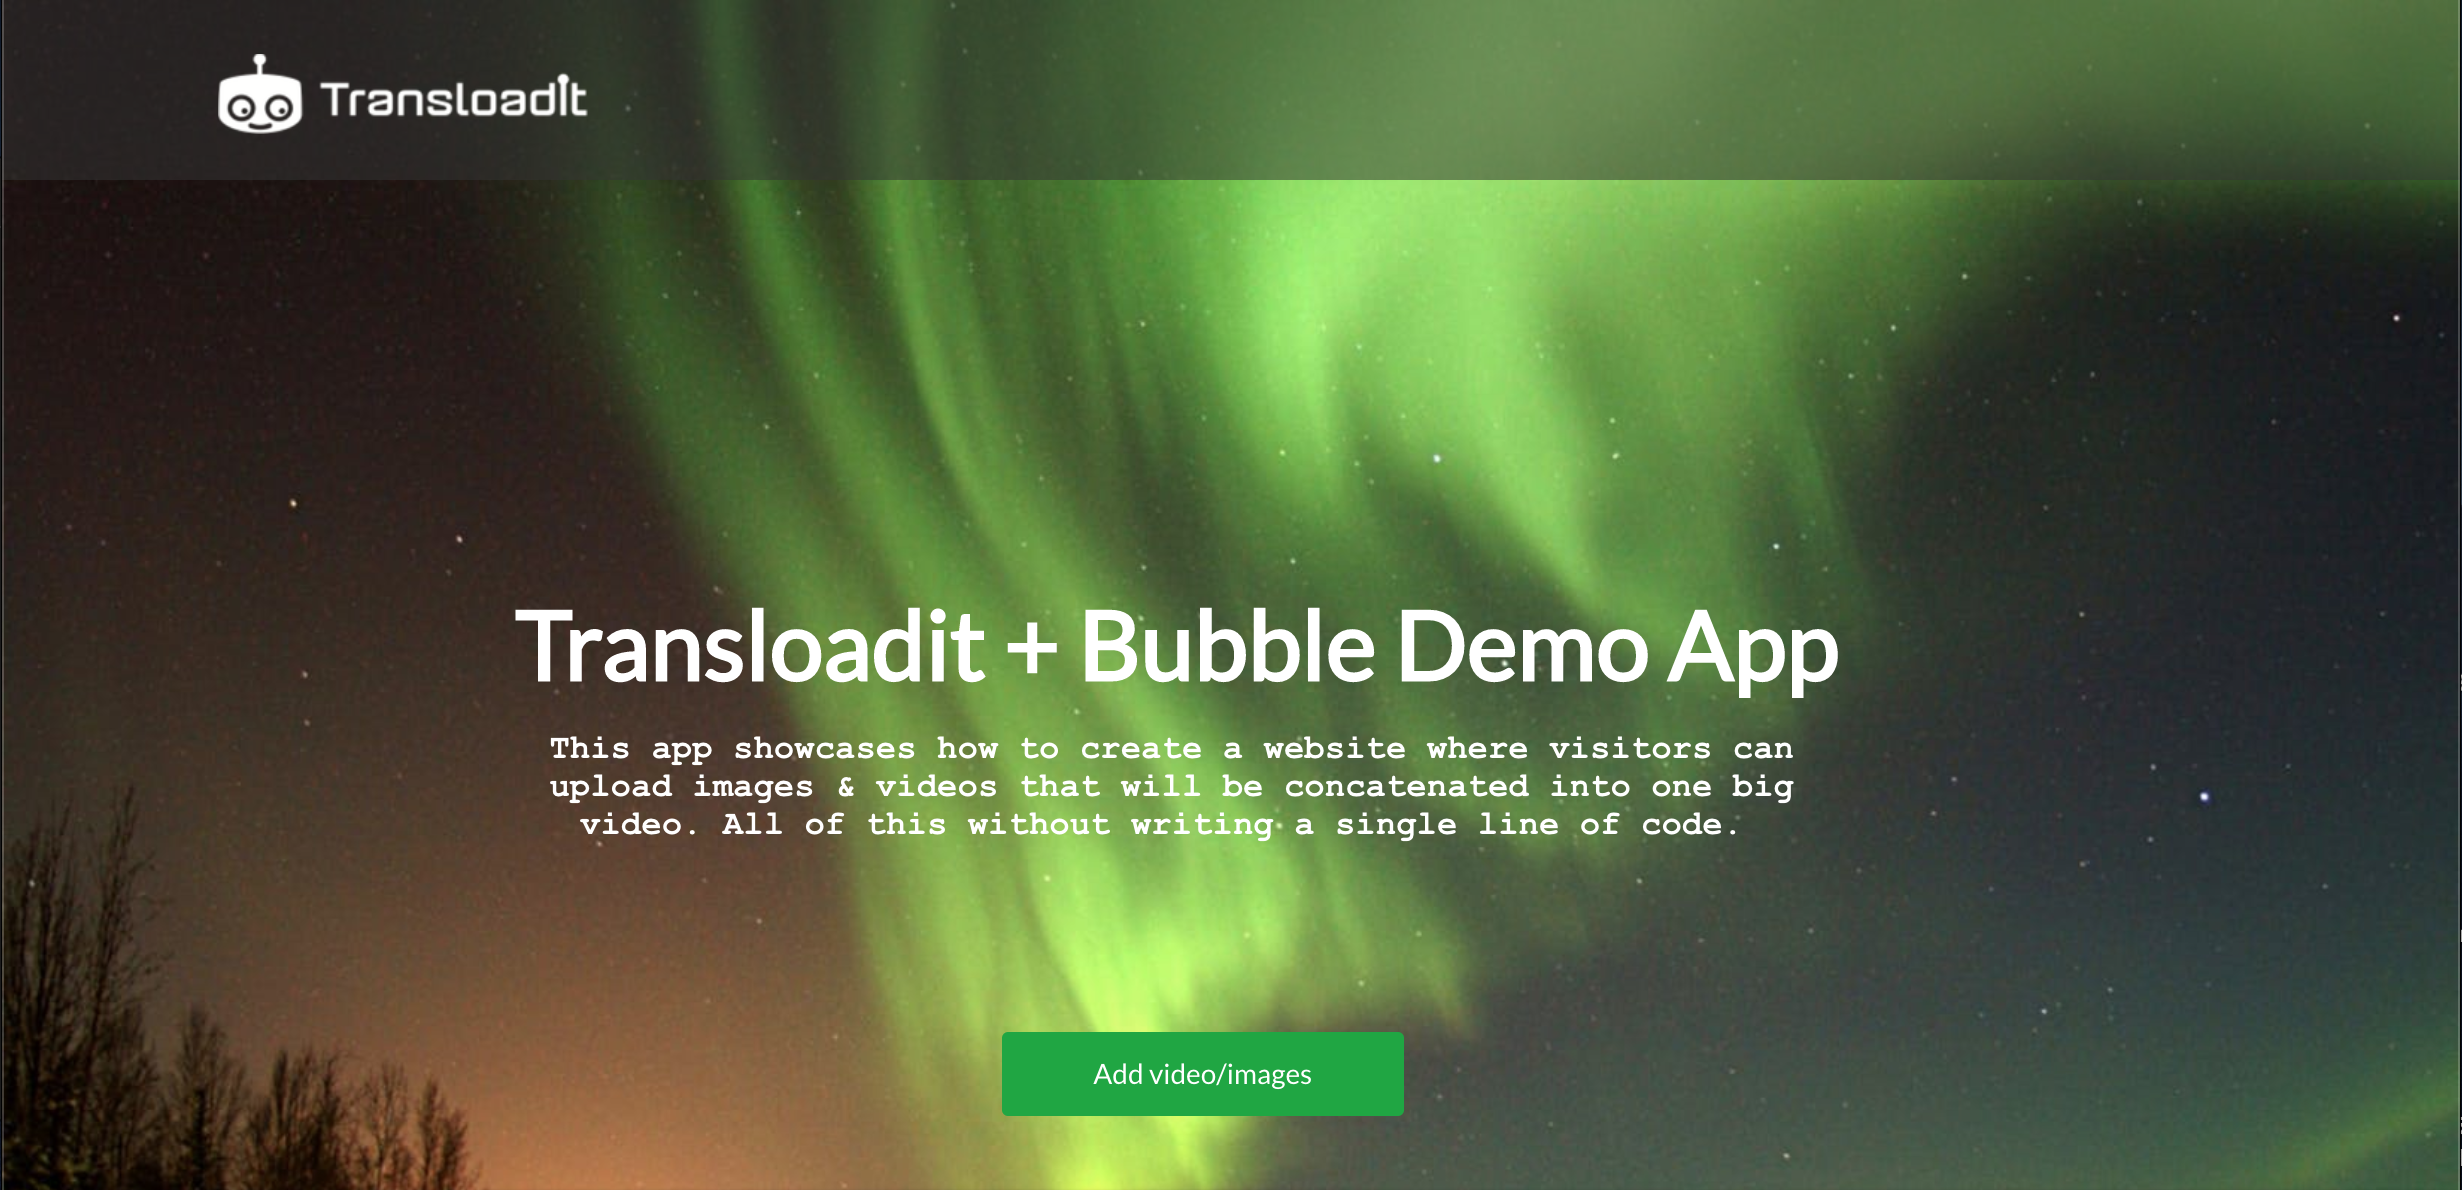 Screenshot of the Transloadit and Bubble demo app